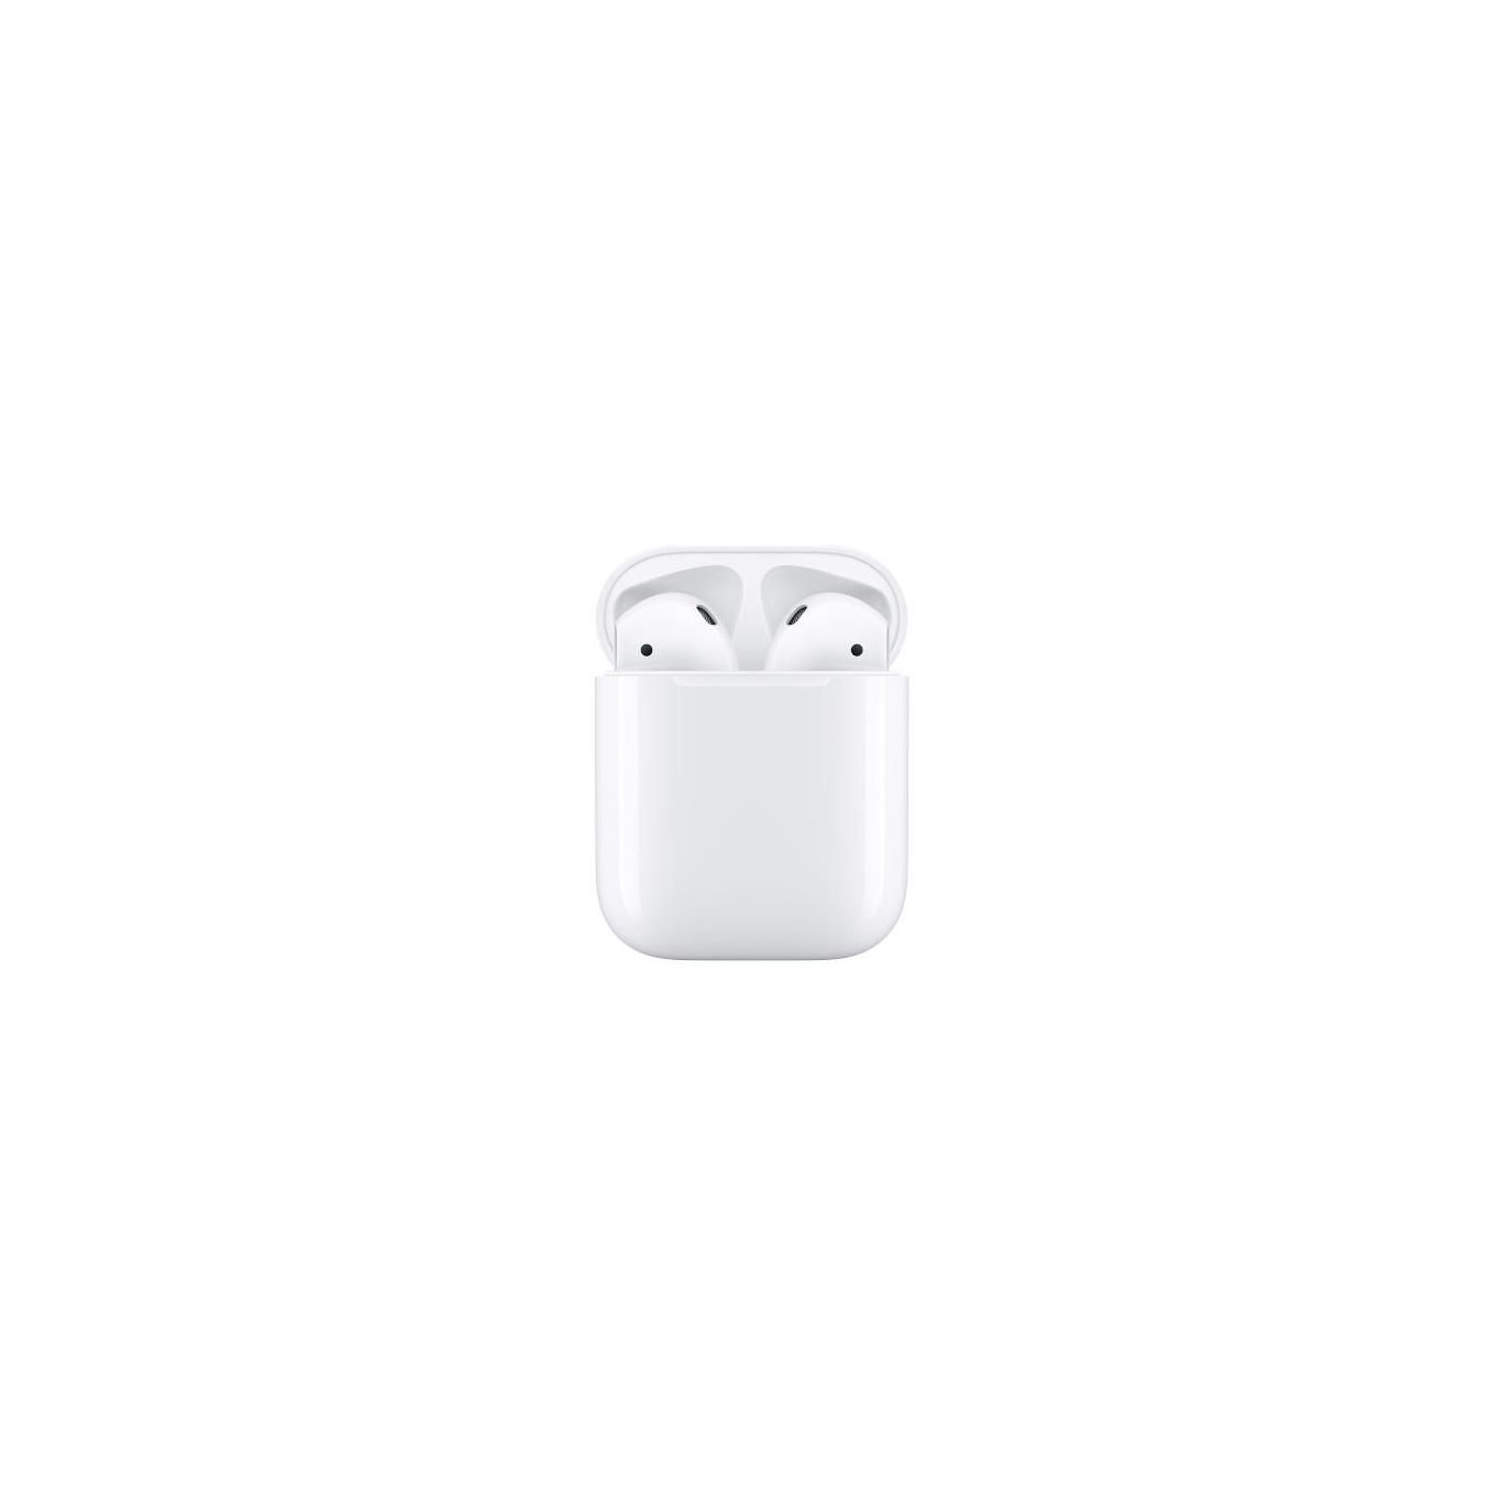 Apple AirPods (2nd generation) True Wireless with Charging Case - Certified Refurbished